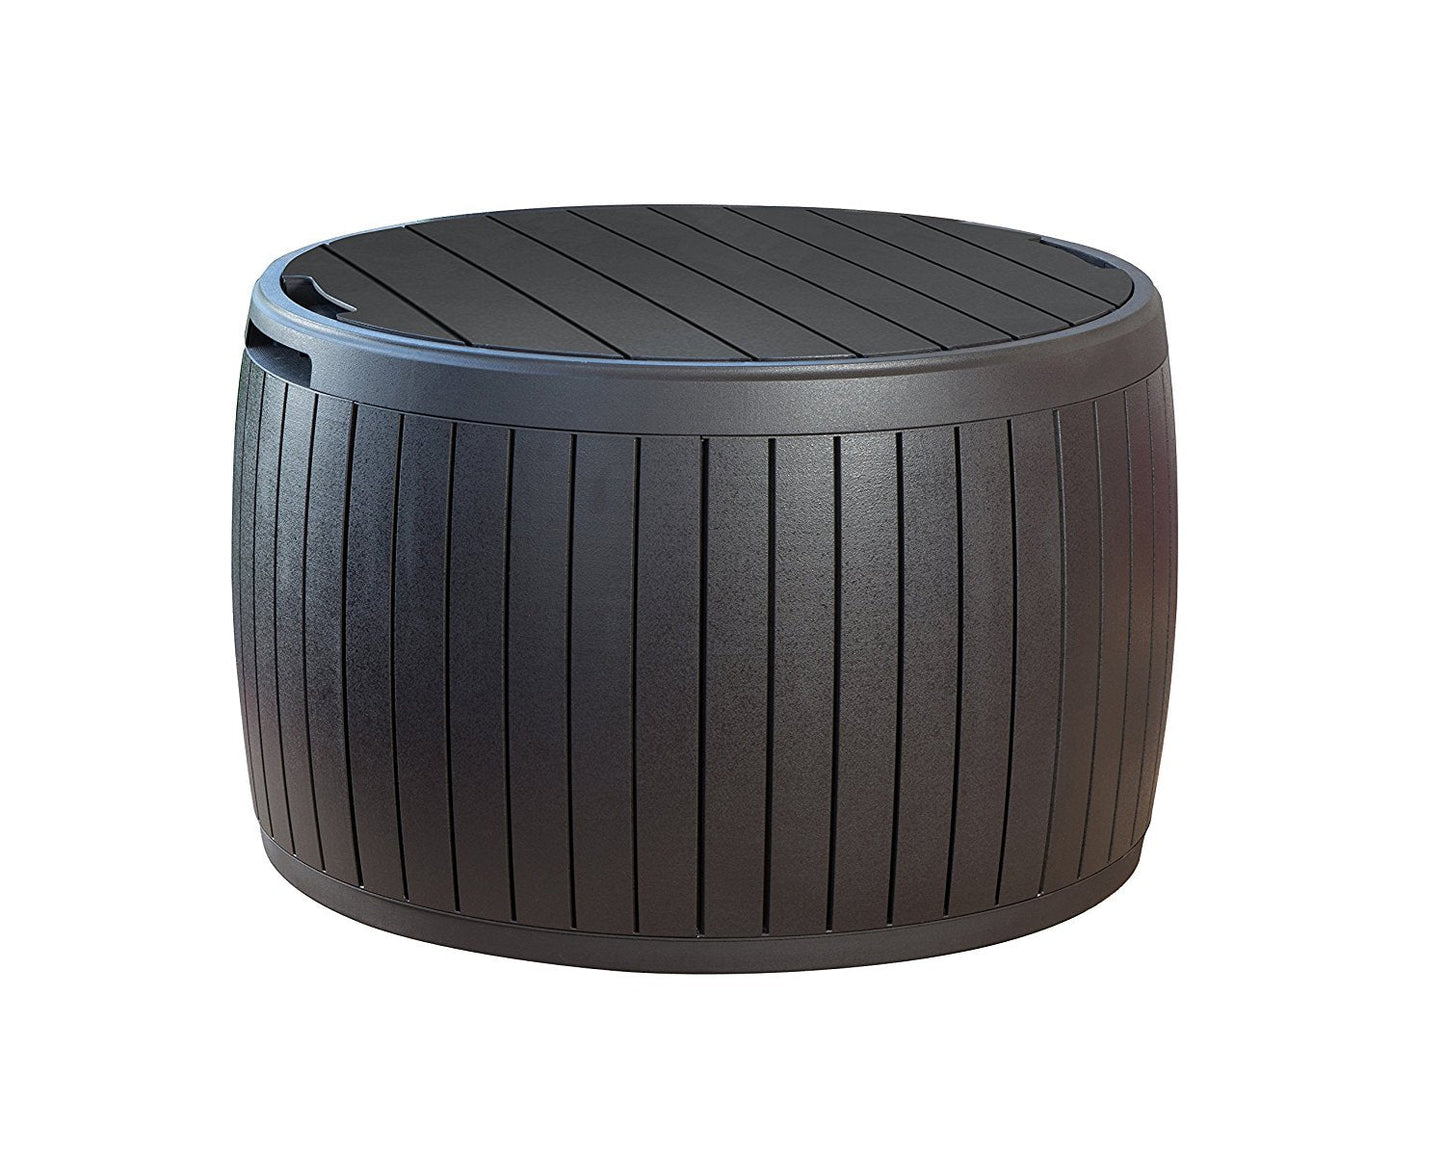 Brown Natural Wood Style Round Outdoor Storage Table/Ottoman - 37 Gallon